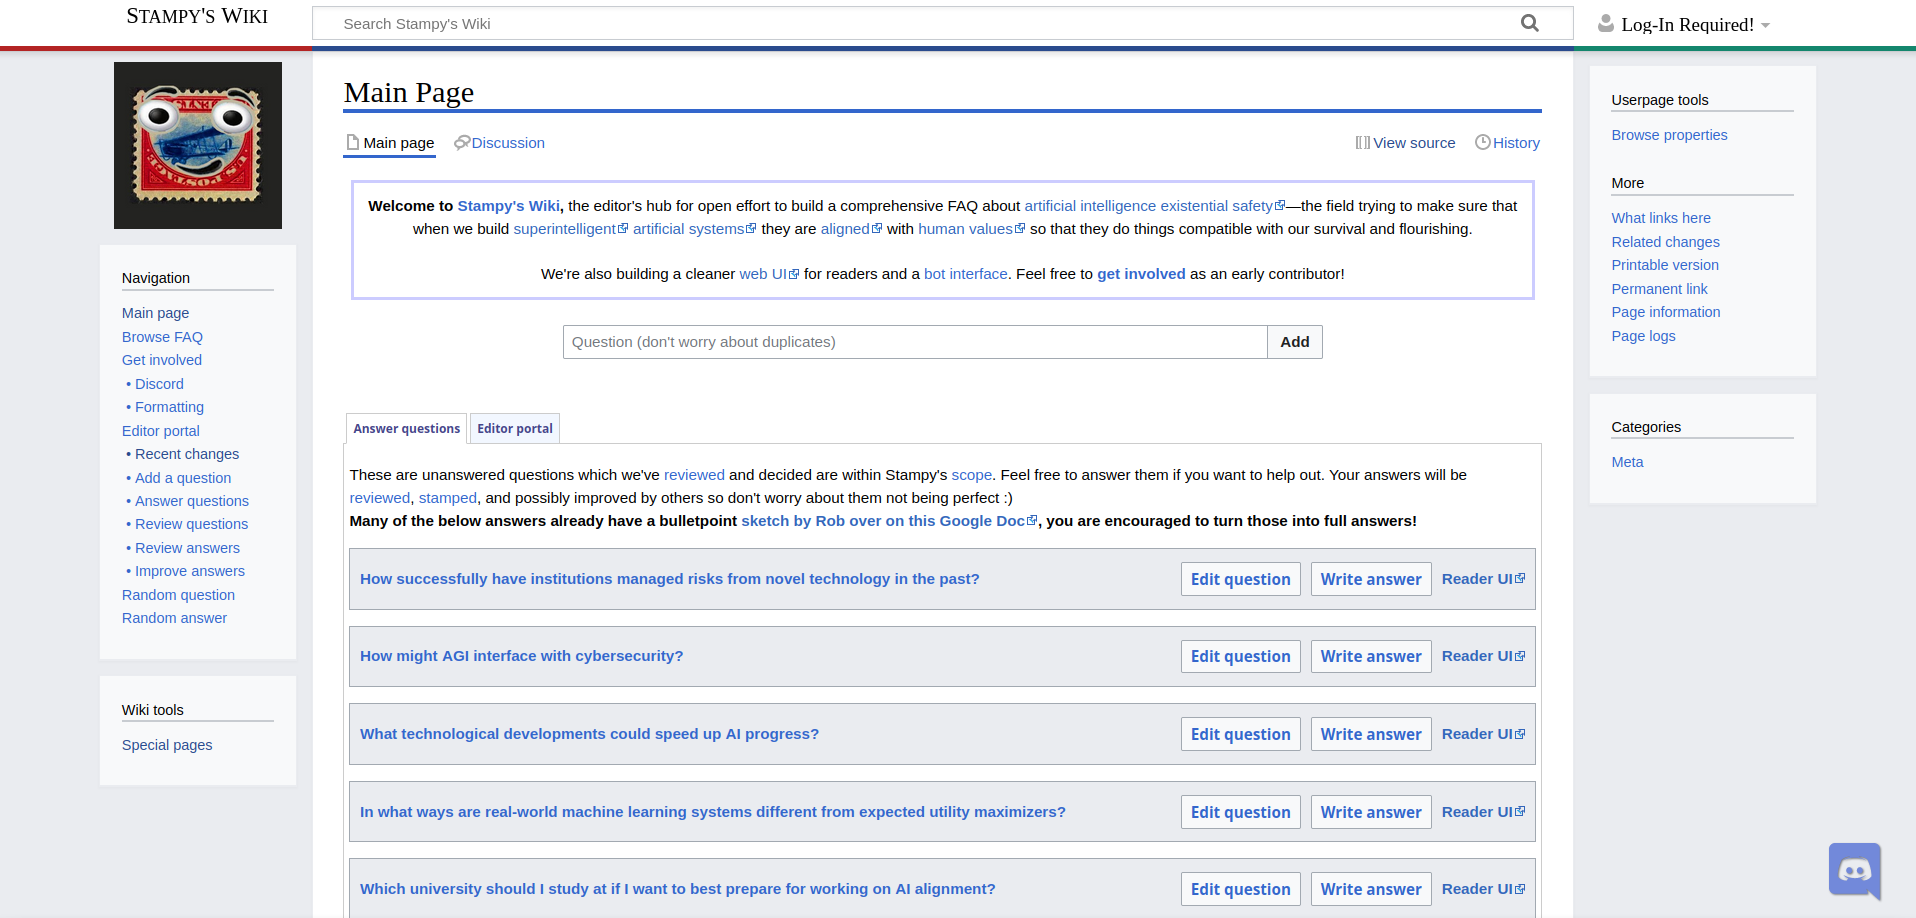 A public and open wiki about AI safety questions. It uses the default ProWiki theme and has Single Sign-On via Discord. https://wiki.stampy.ai